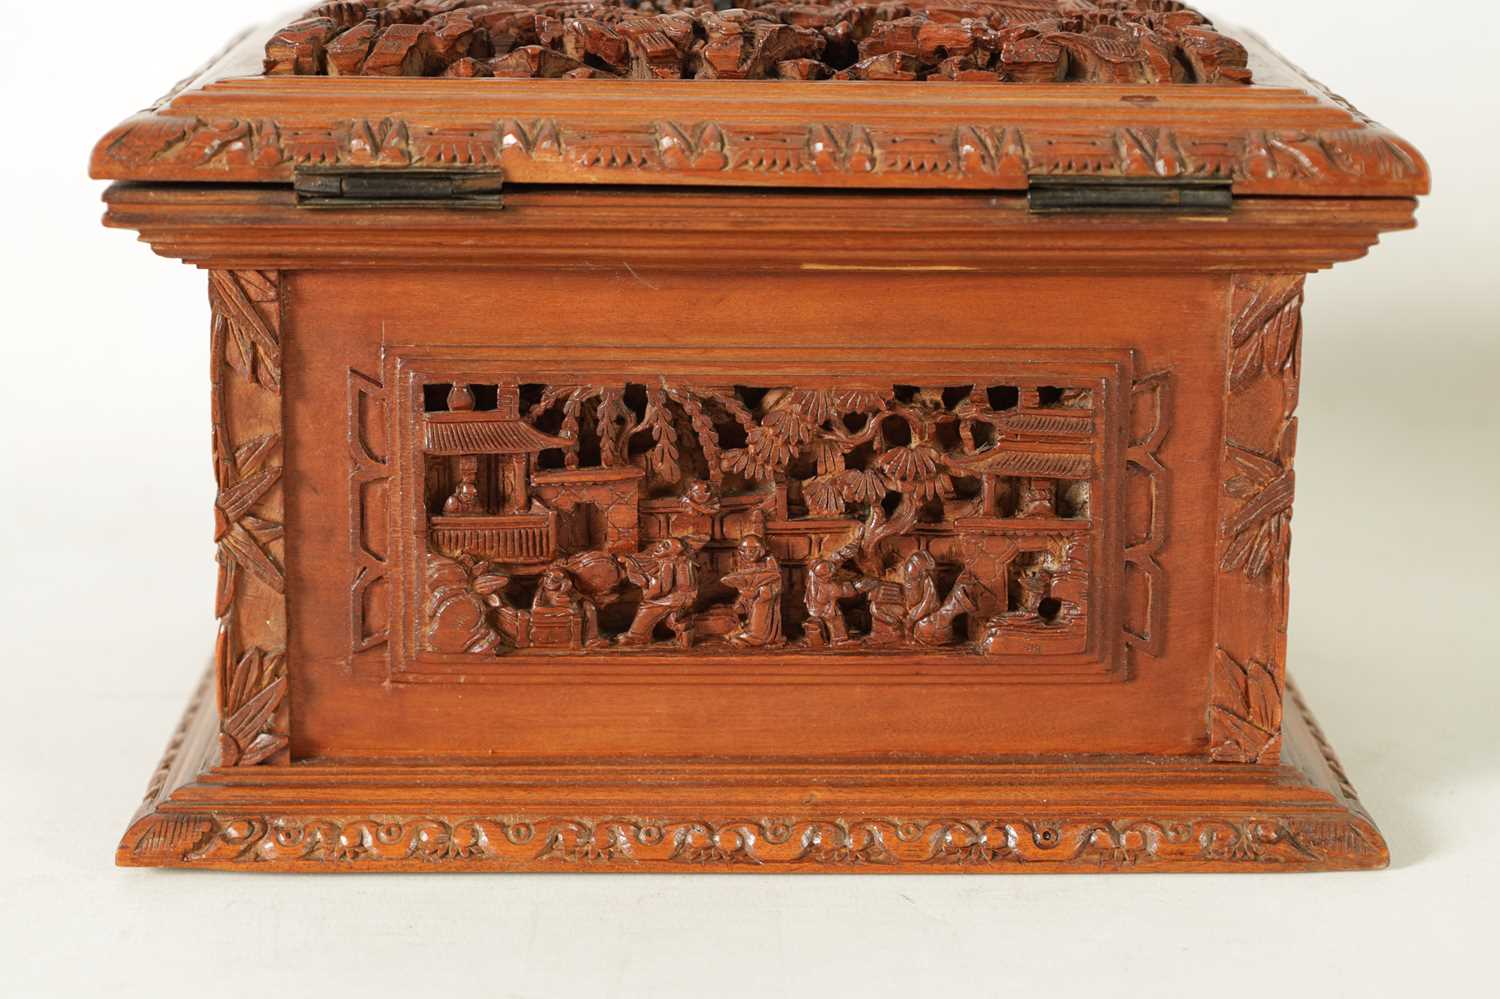 A LATE 19TH CENTURY CHINESE CARVED SANDALWOOD LIDDED JEWELLERY BOX - Image 5 of 10